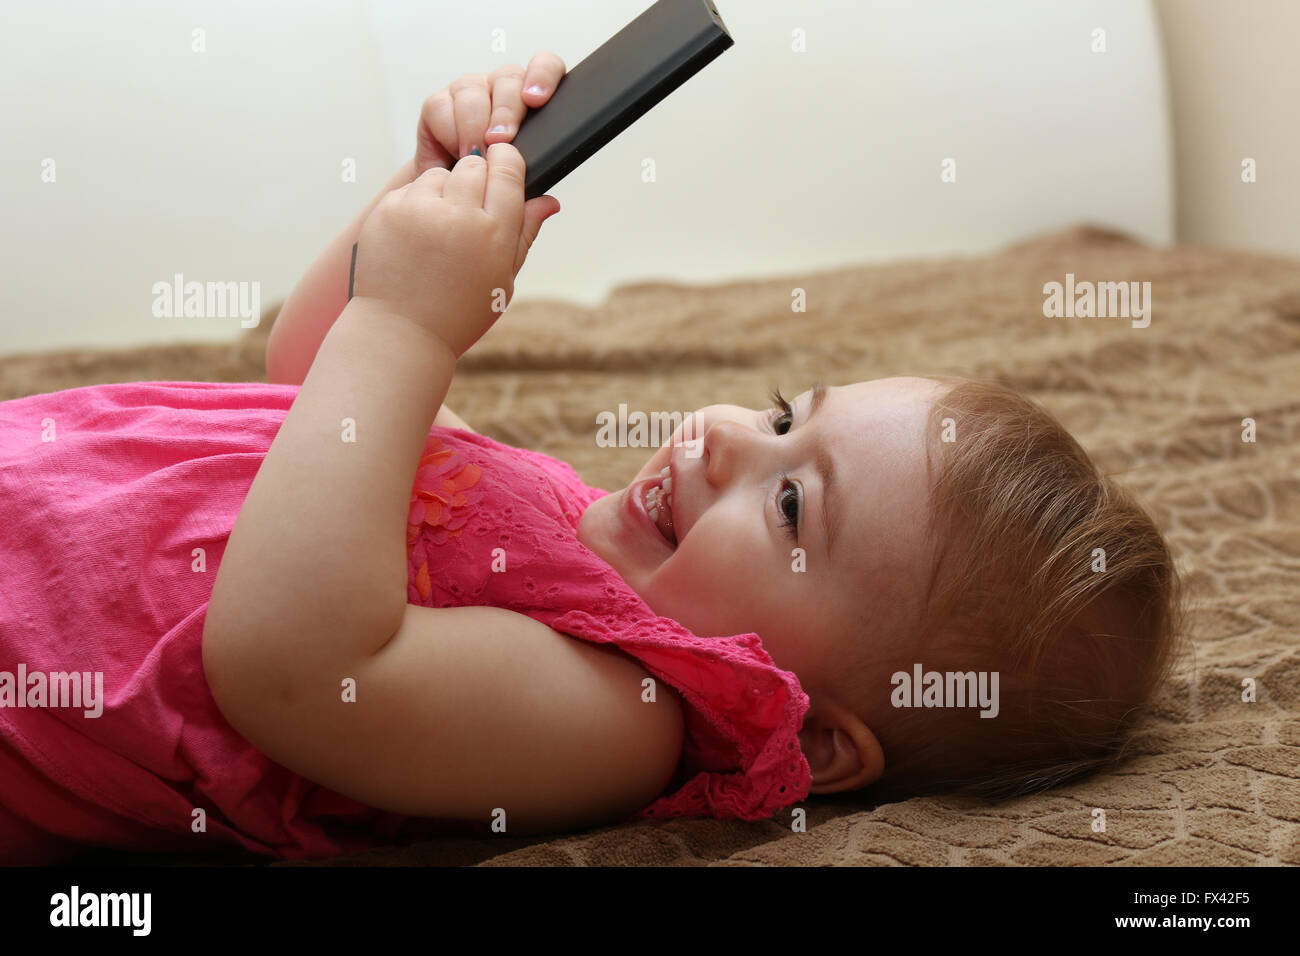 little smiling child playing with your smartphone lying on a sofa Stock Photo